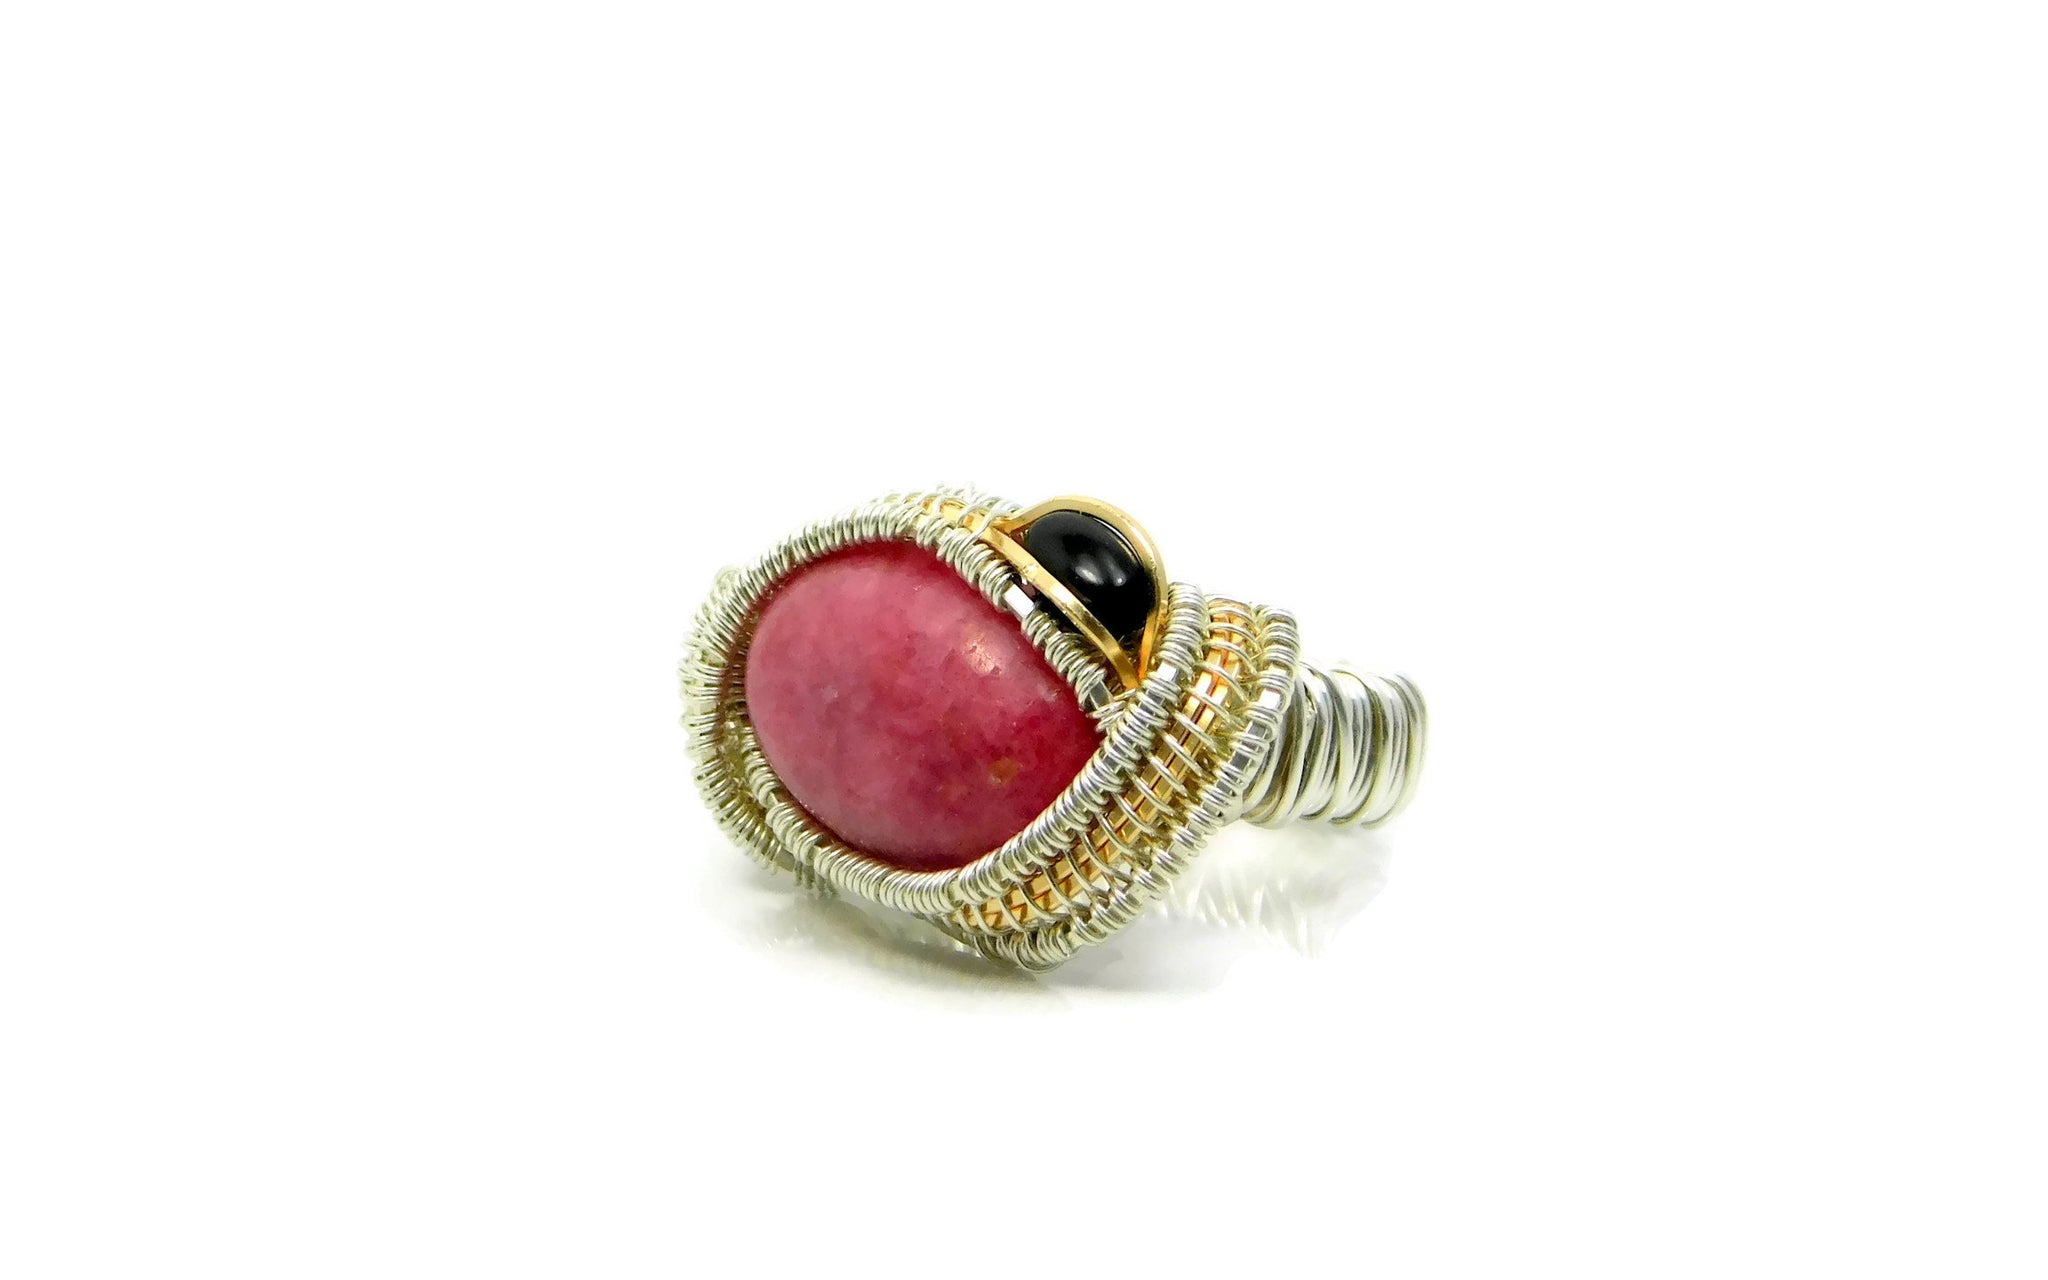 Rhodonite and Black Onyx Ring in sterling silver and 14kt gold fill cold fusion jewelry gold and silver jewelry handmade silver jewelry sterling silver jewelry artisan jewelry handmade gemstone jewelry one of a kind jewelry unique jewelry gemstone rings